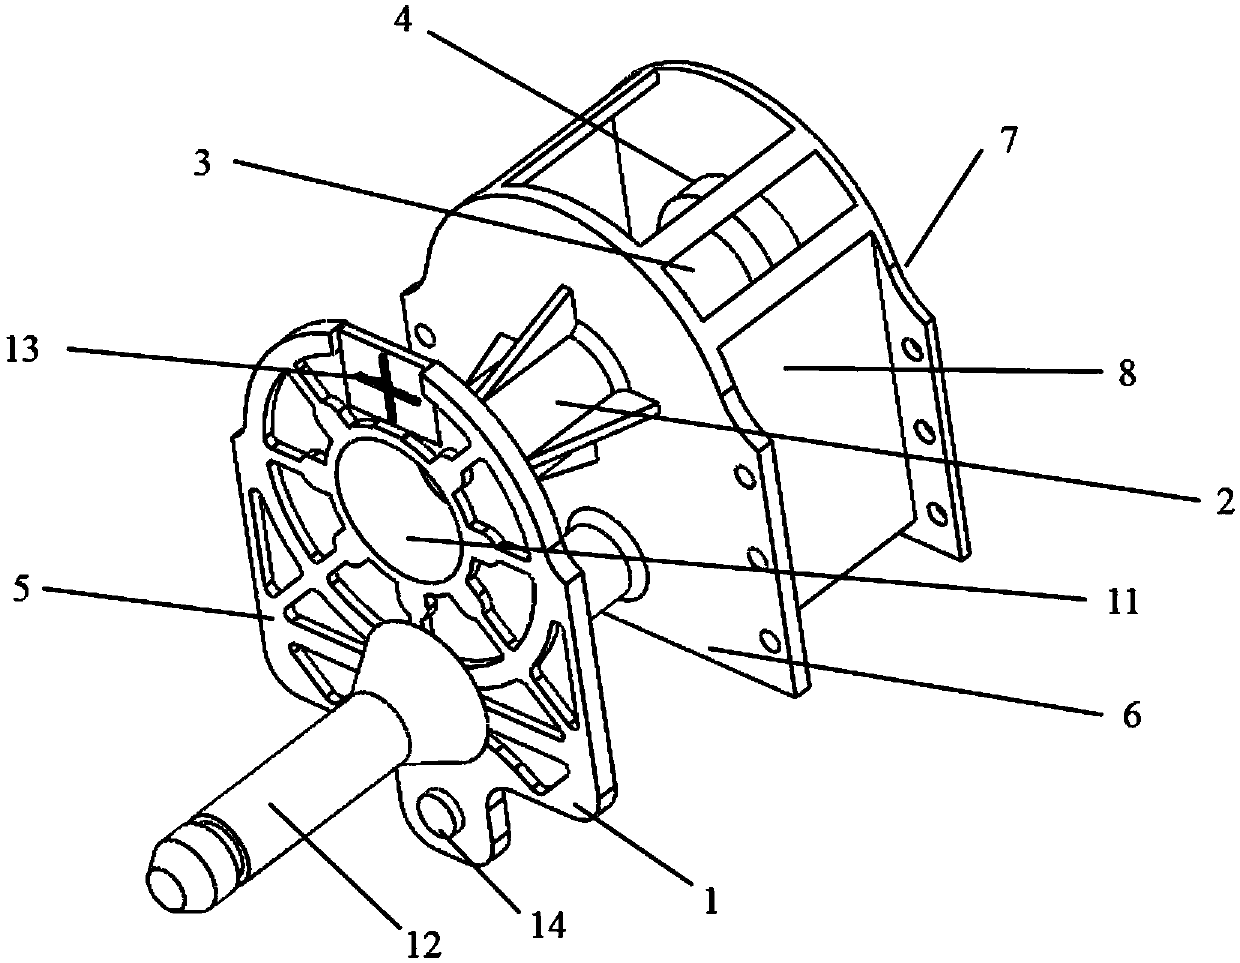 Space splicing, positioning, locking and adjusting integrated mechanism and space splicing reflector